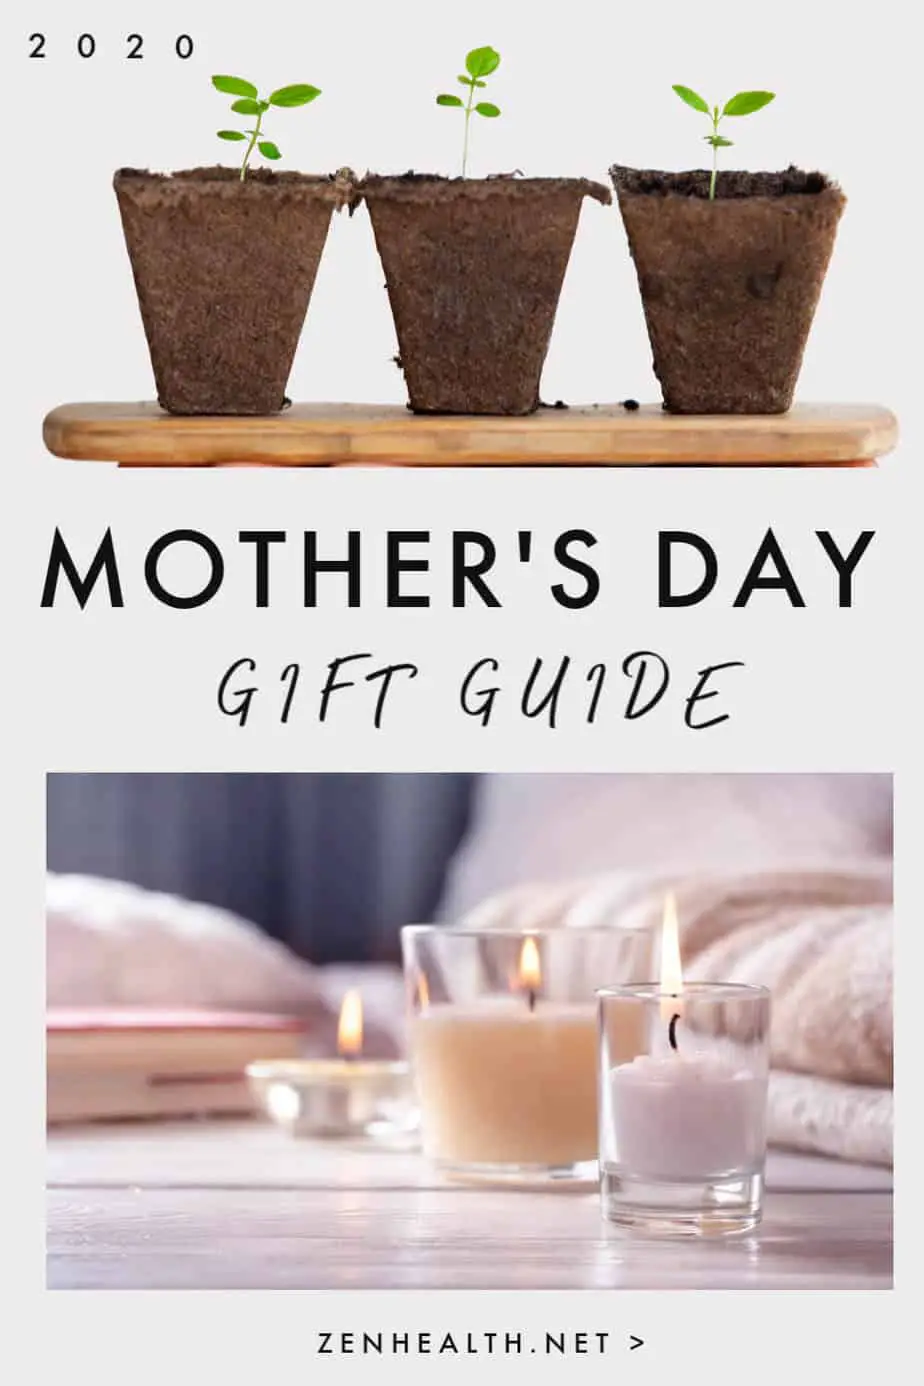 2020 Mother's Day Gift Guide